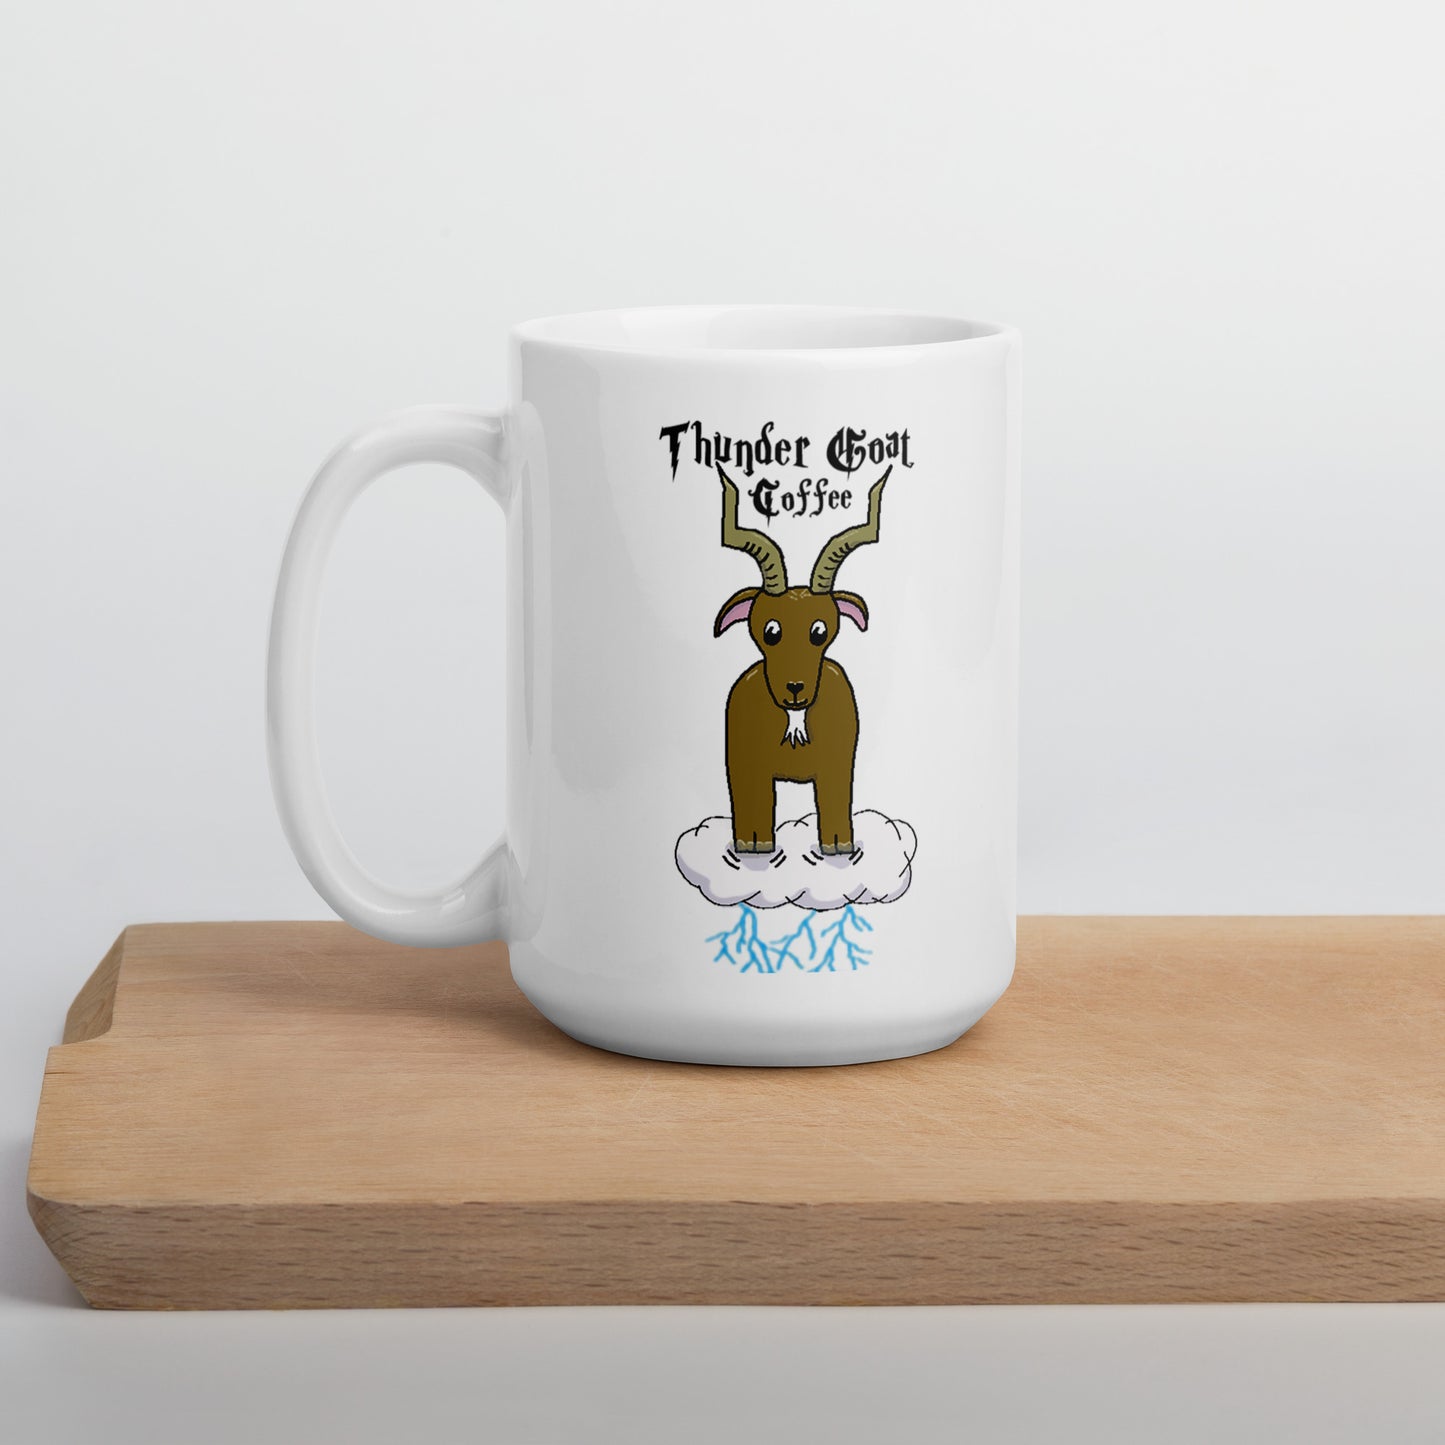 Thunder Goat Coffee cup - The Loki Adventures